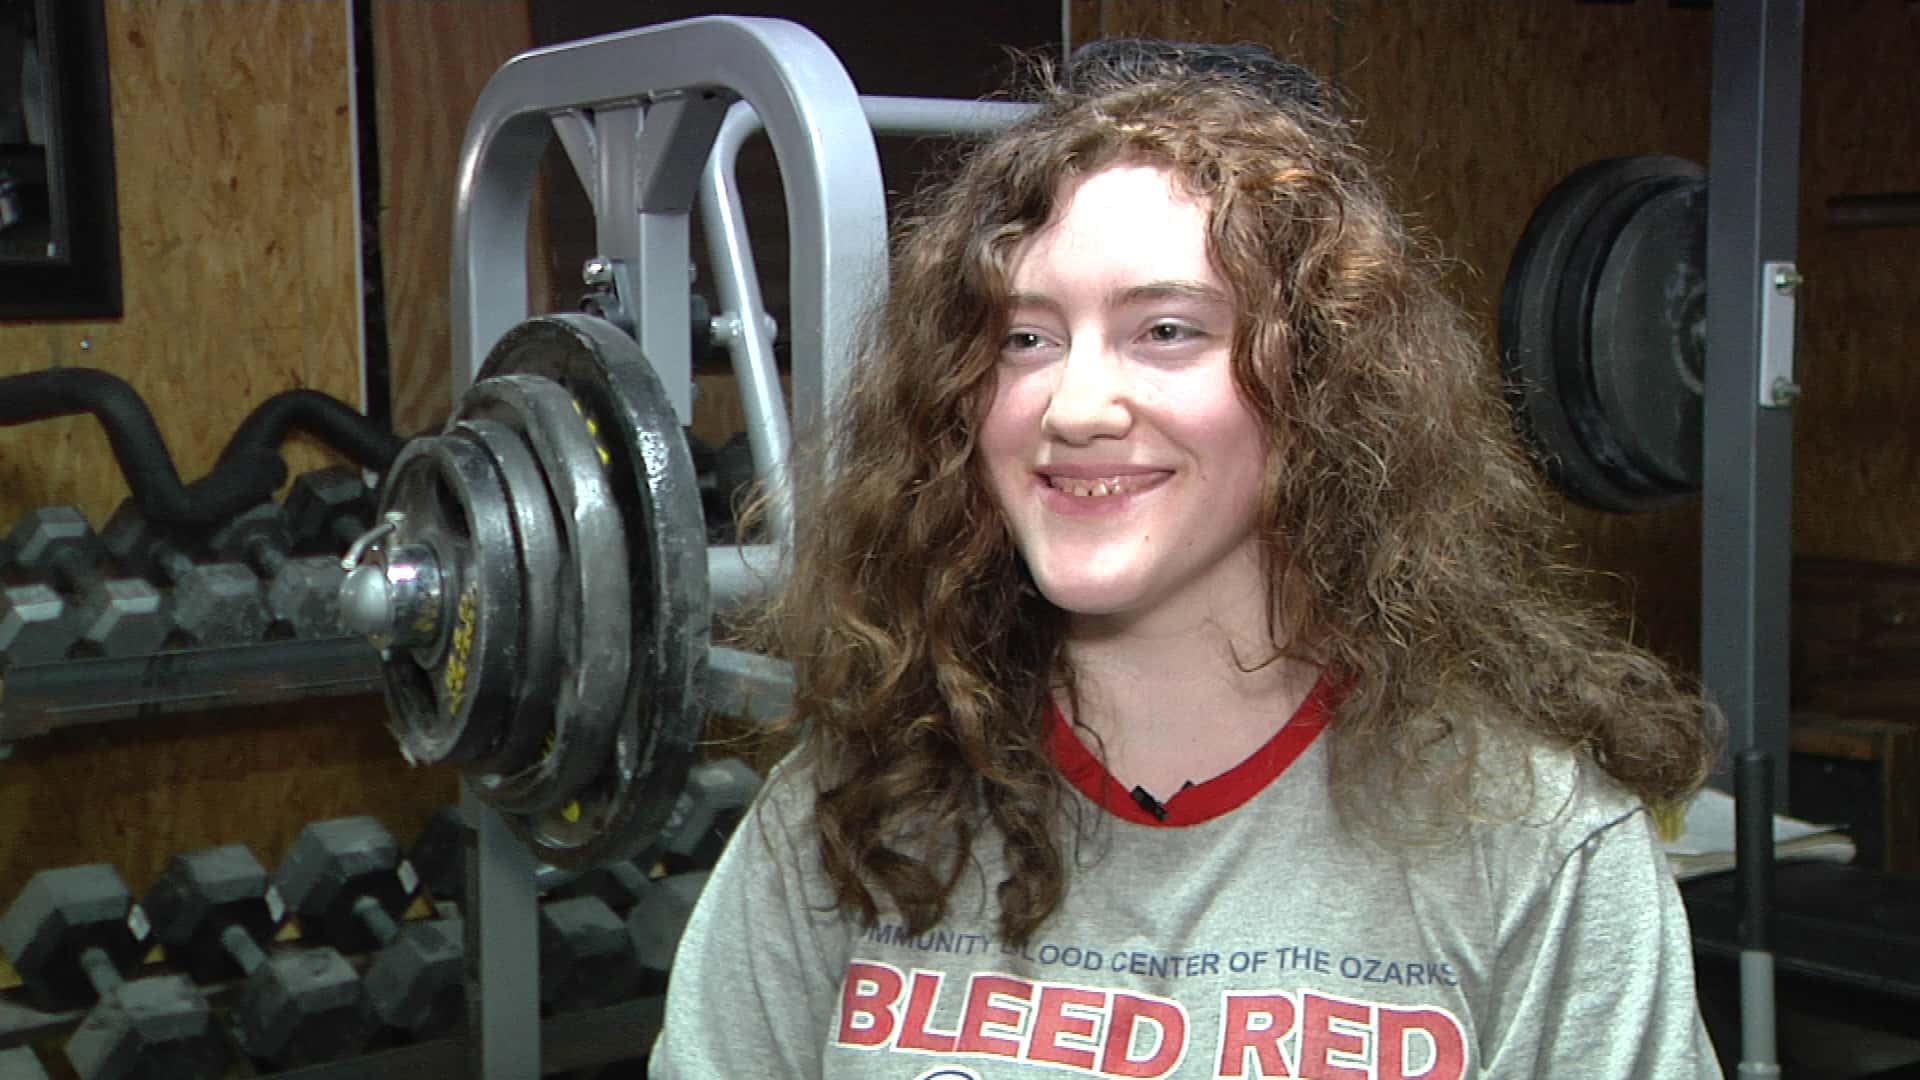 caitlin-powerlifter-aow